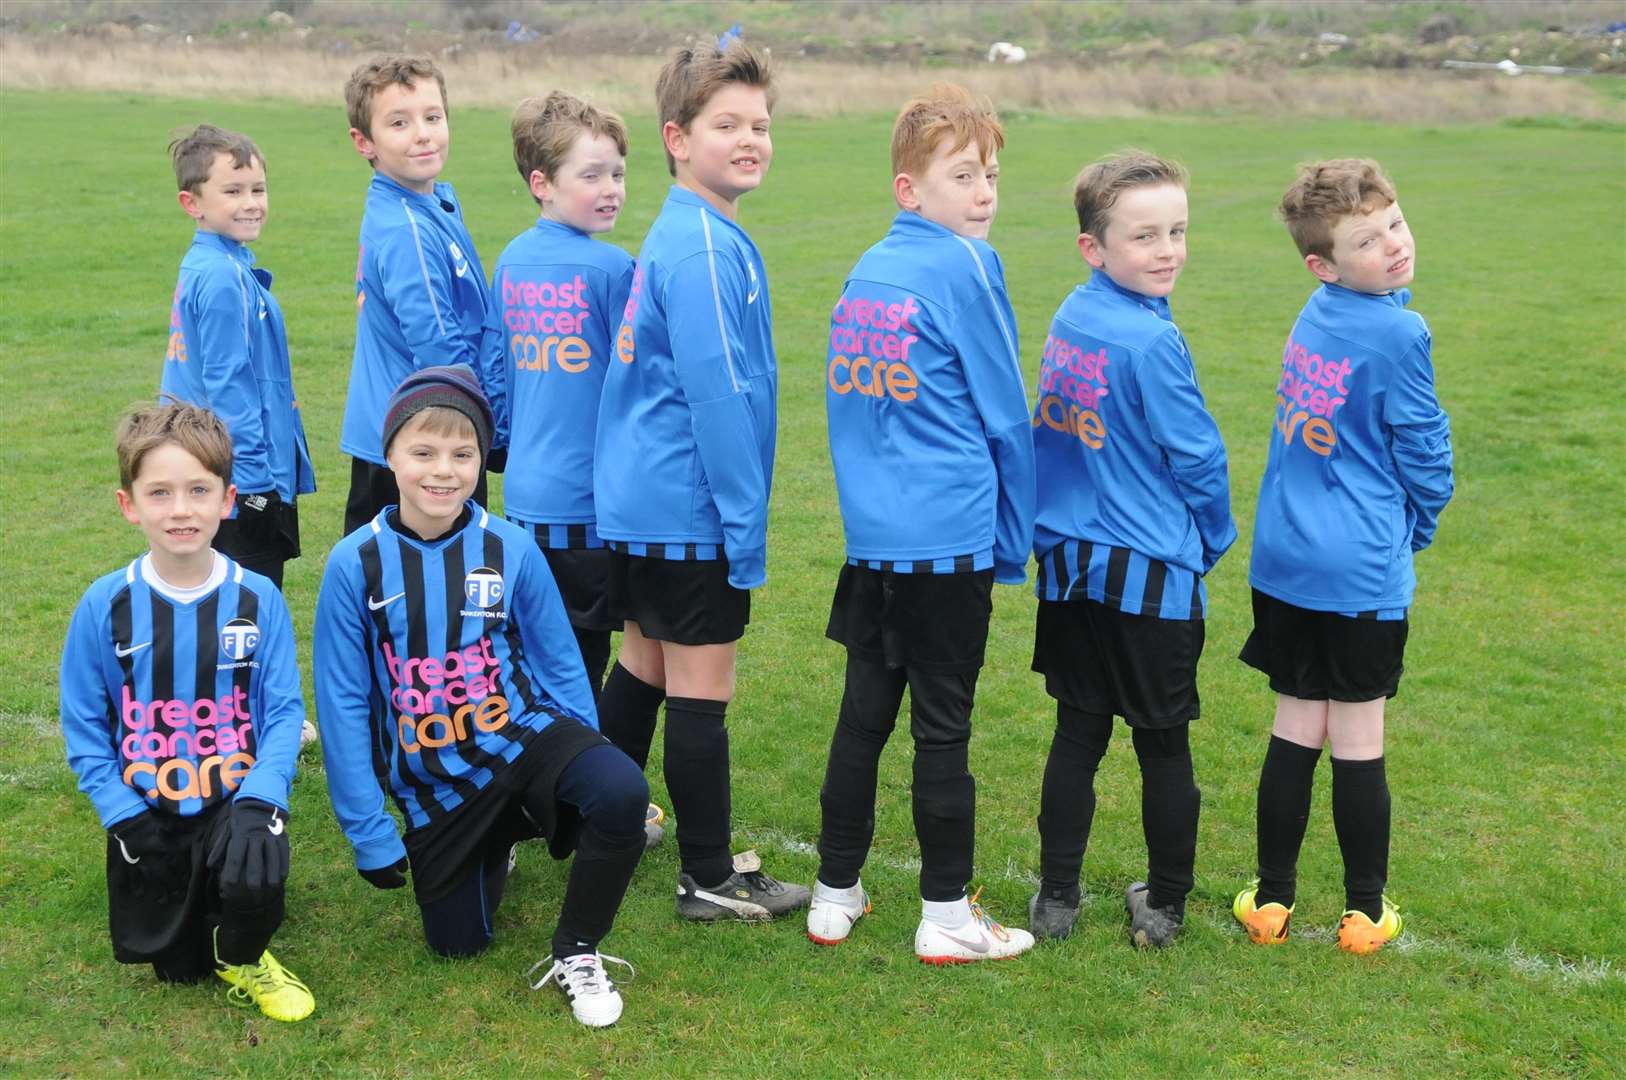 Tankerton FC under 9s team has had Breast Cancer Care's logo emblazoned on their kit